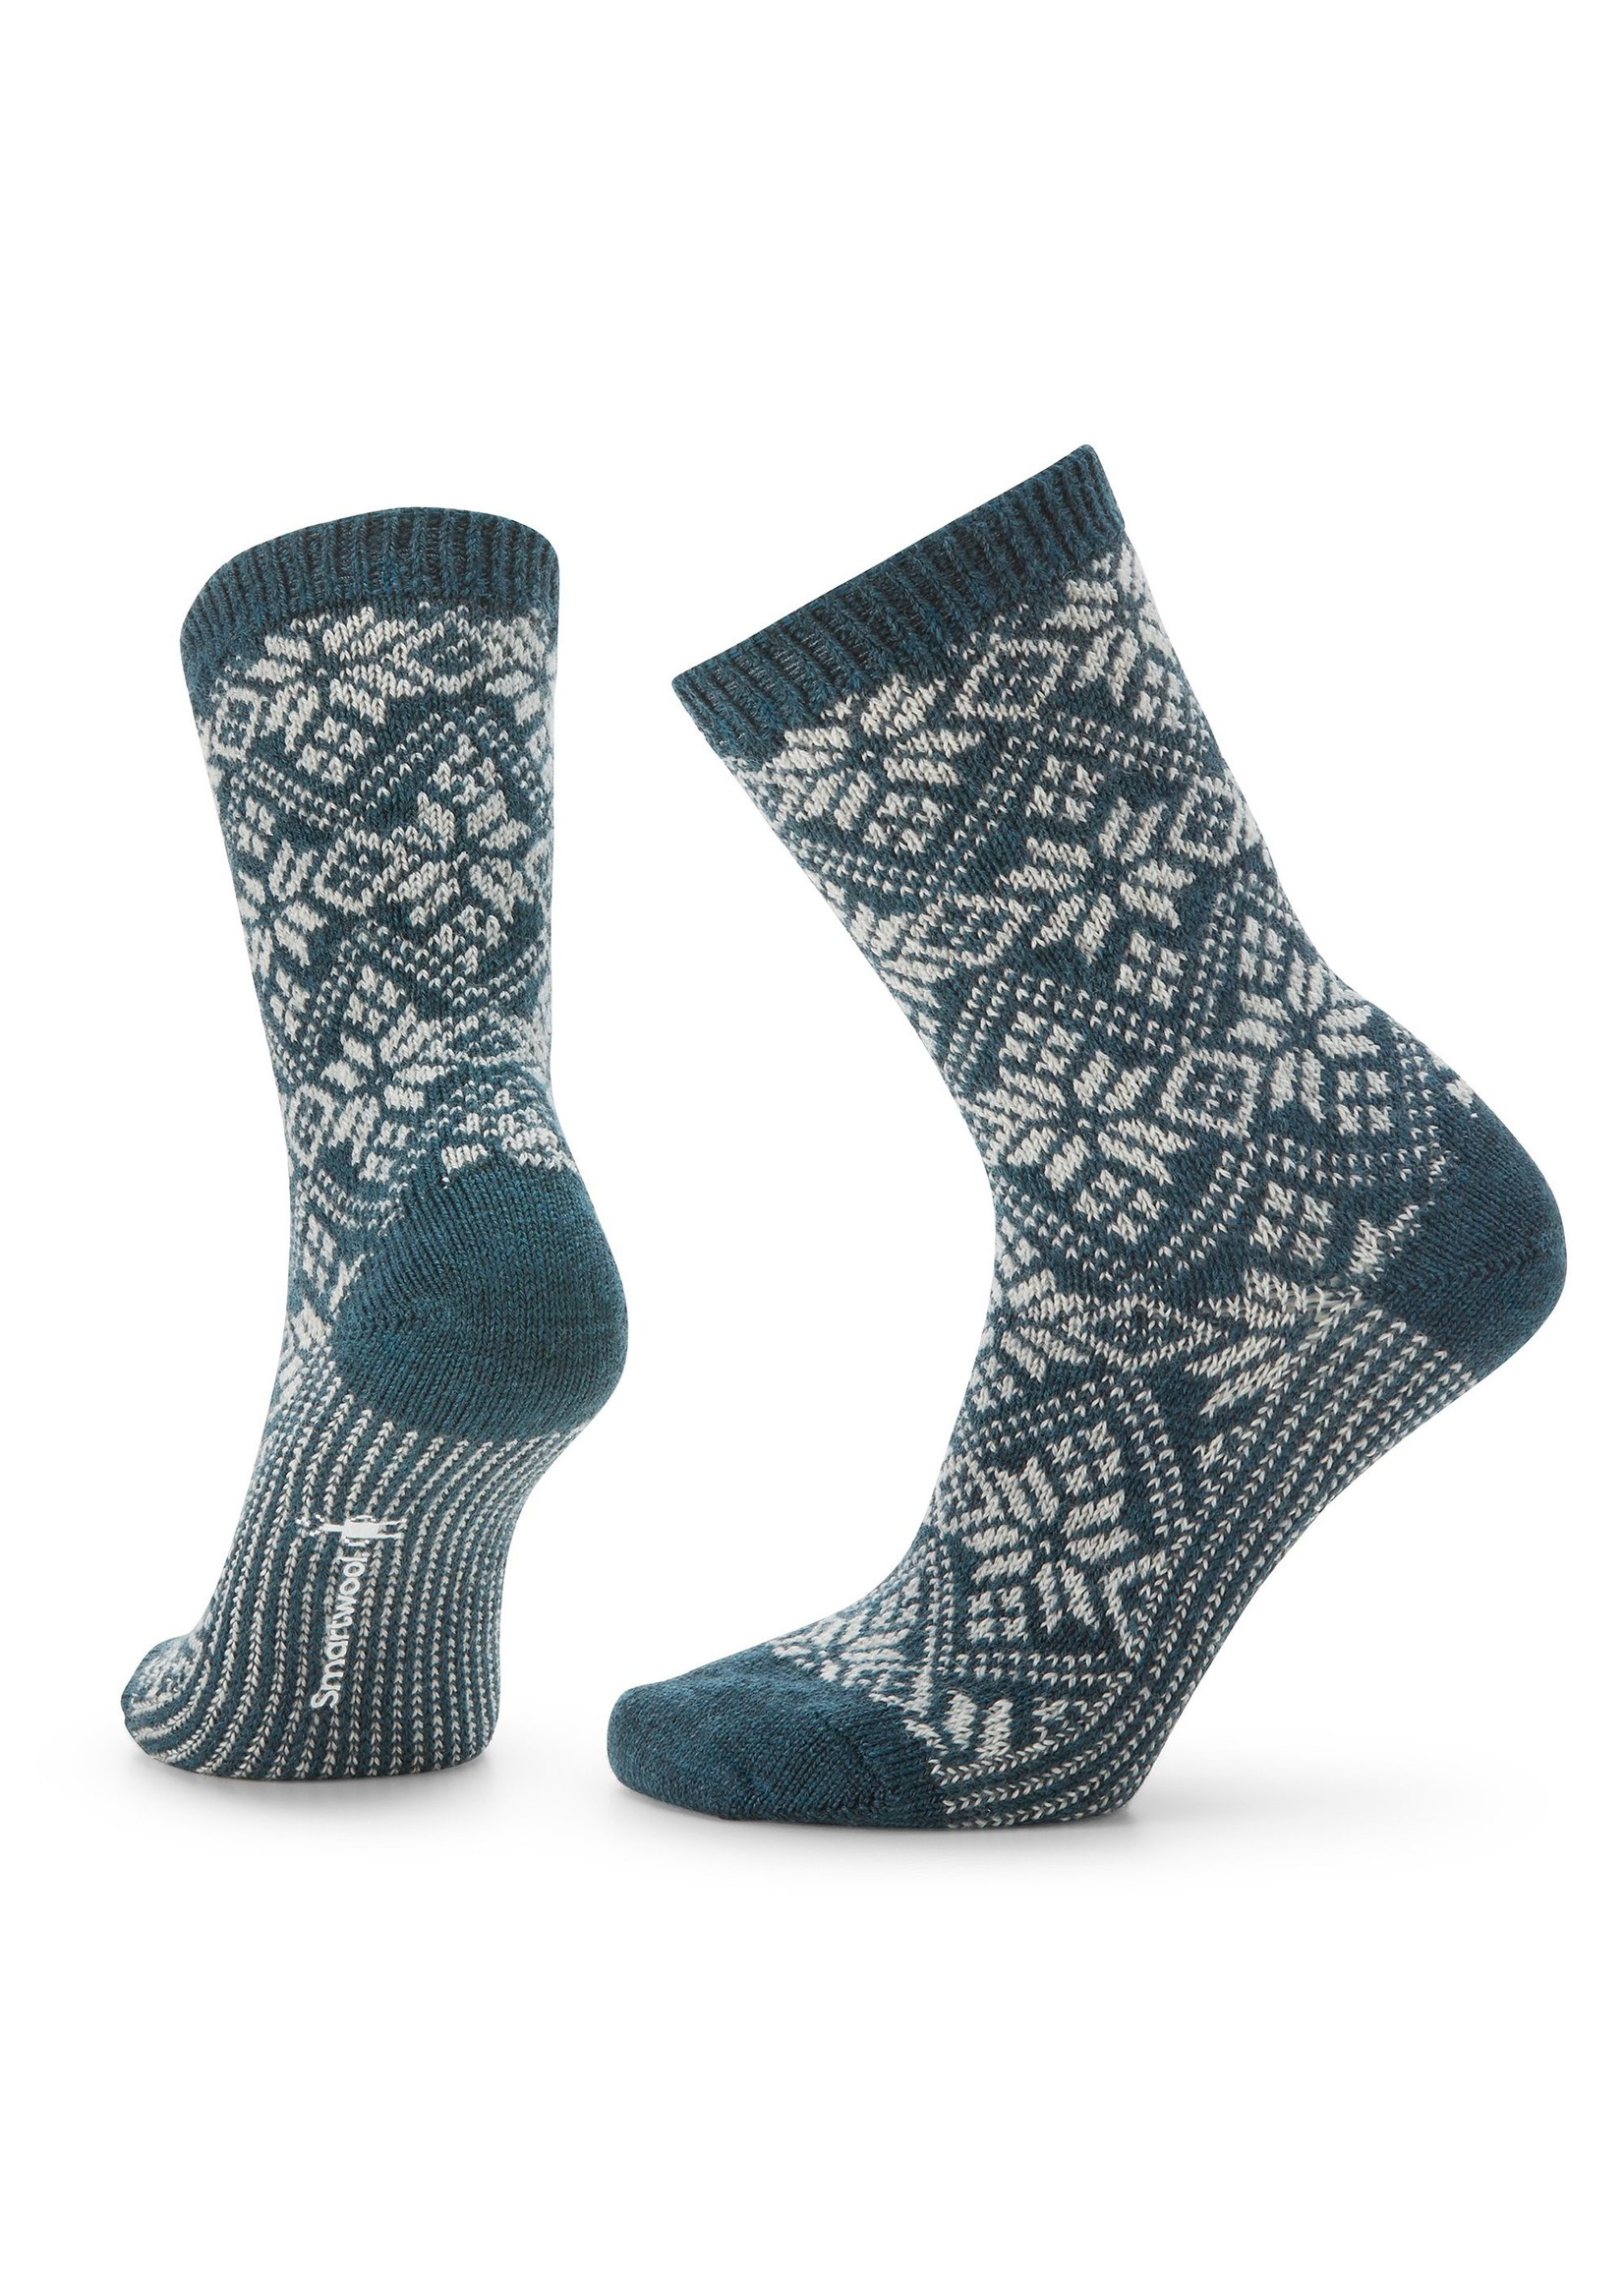 SMARTWOOL Women's traditional socks with snowflake prints